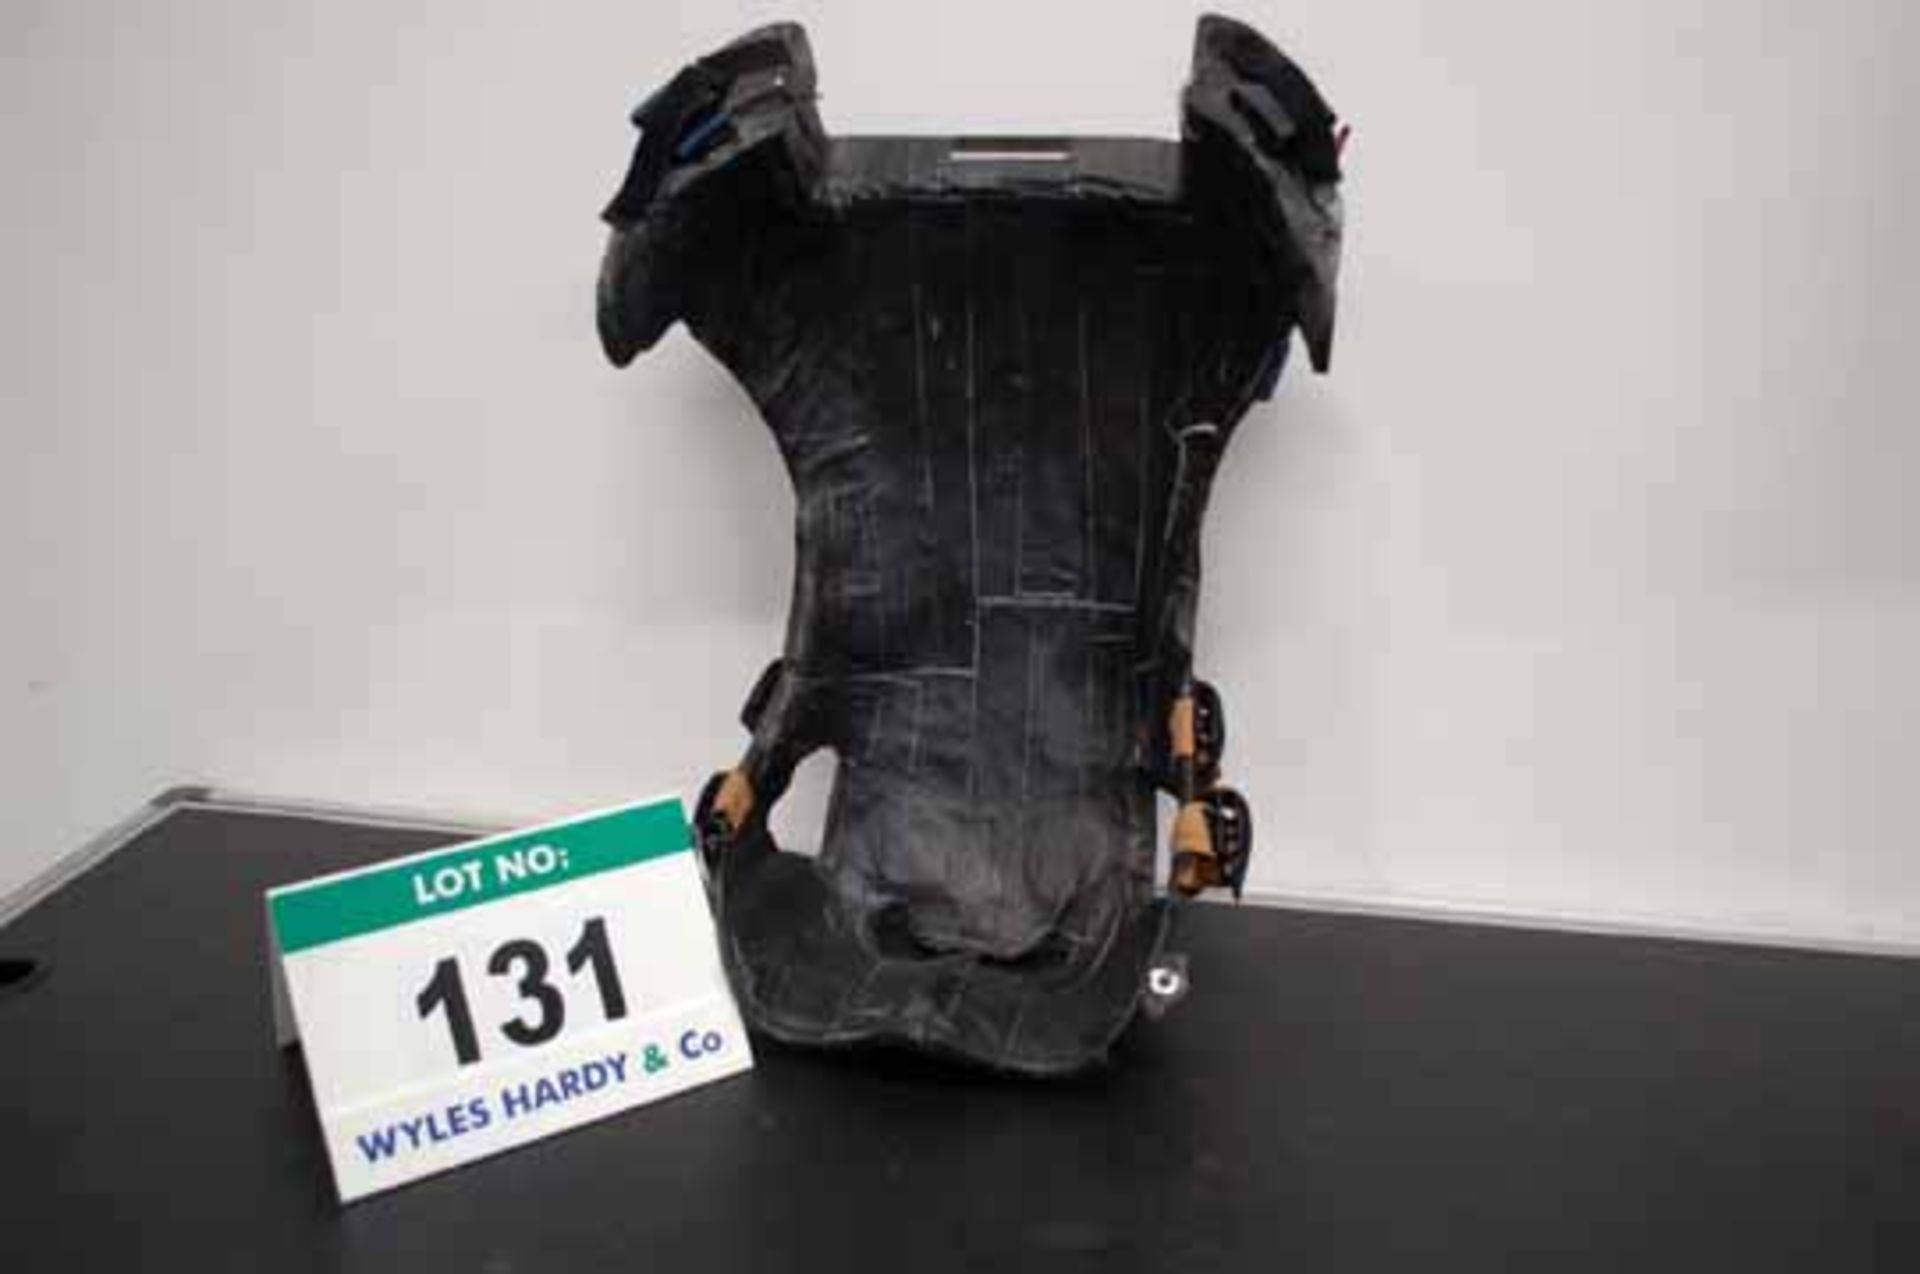 A Carbon Fibre Drivers Seat - Kobayashi, with FIA Medical Strapping, No. 12-LW-0337-02